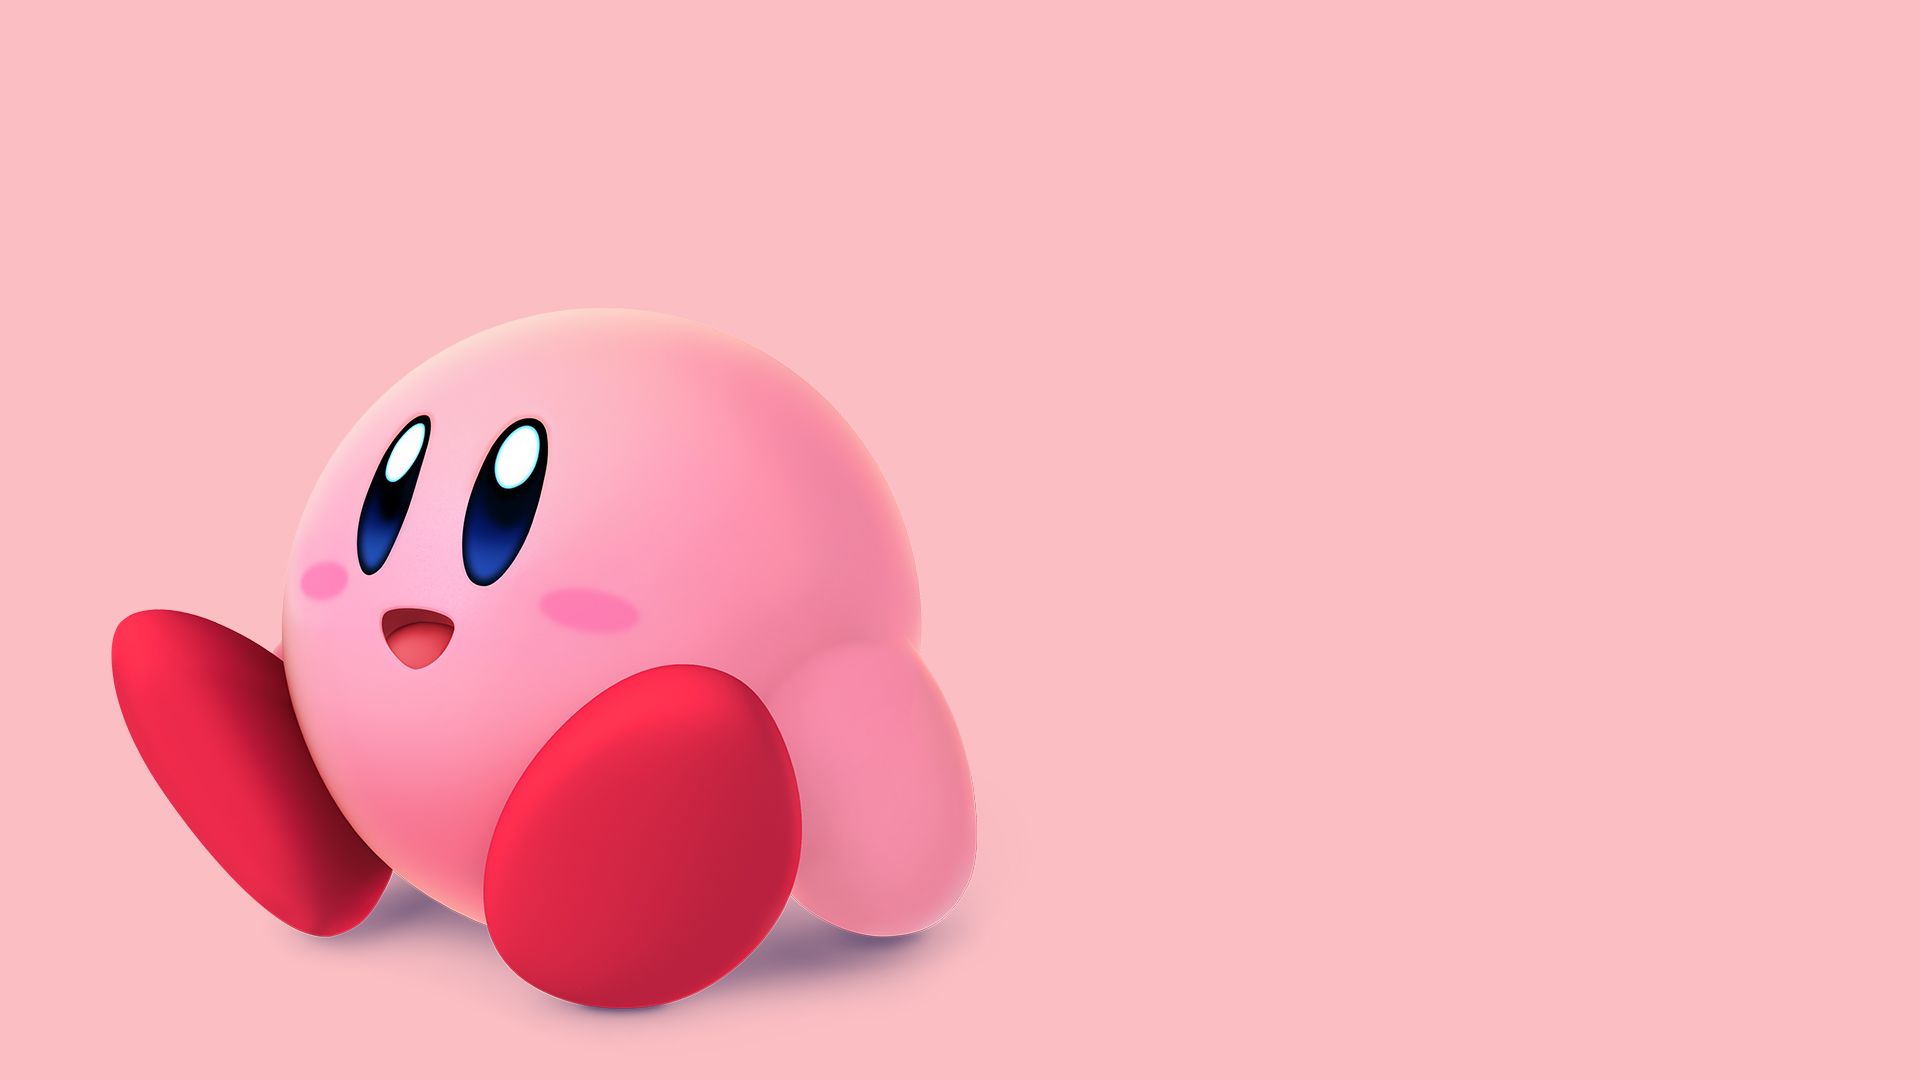 A pink background with a pink and red round character with big eyes and pink cheeks on the left side. - Nintendo